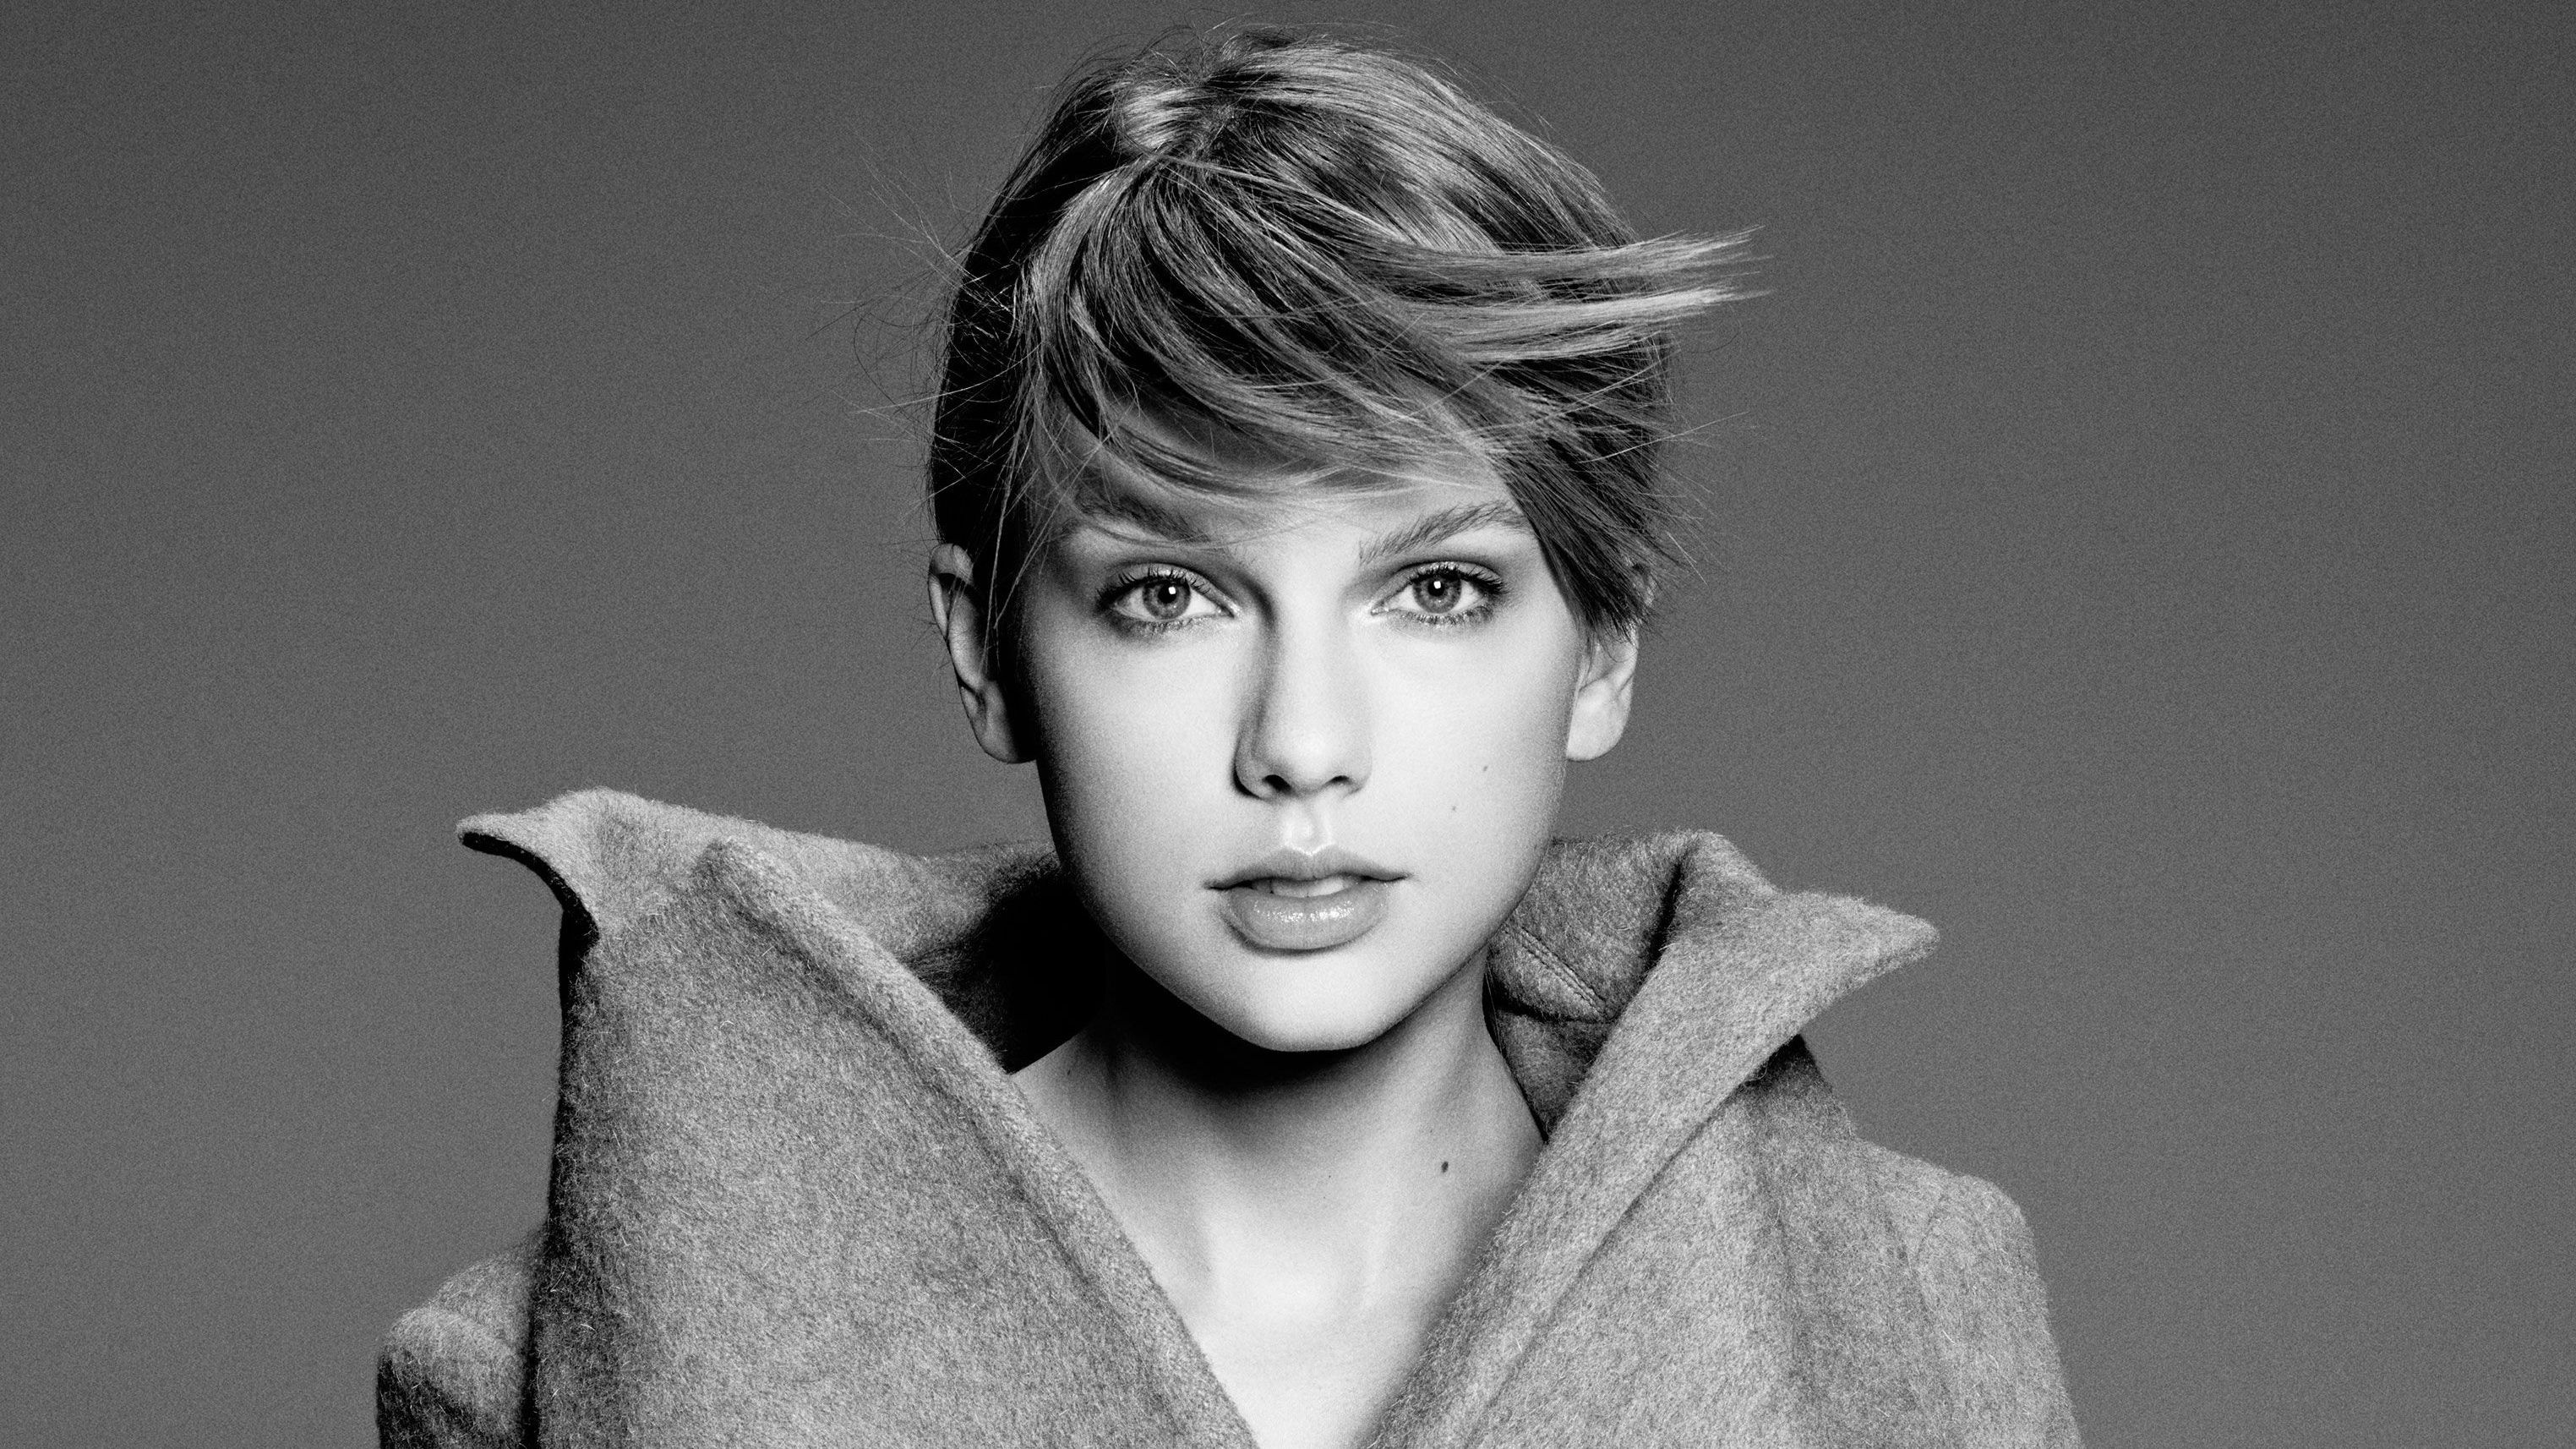 Taylor Swift Photoshoot 2019 Wallpapers